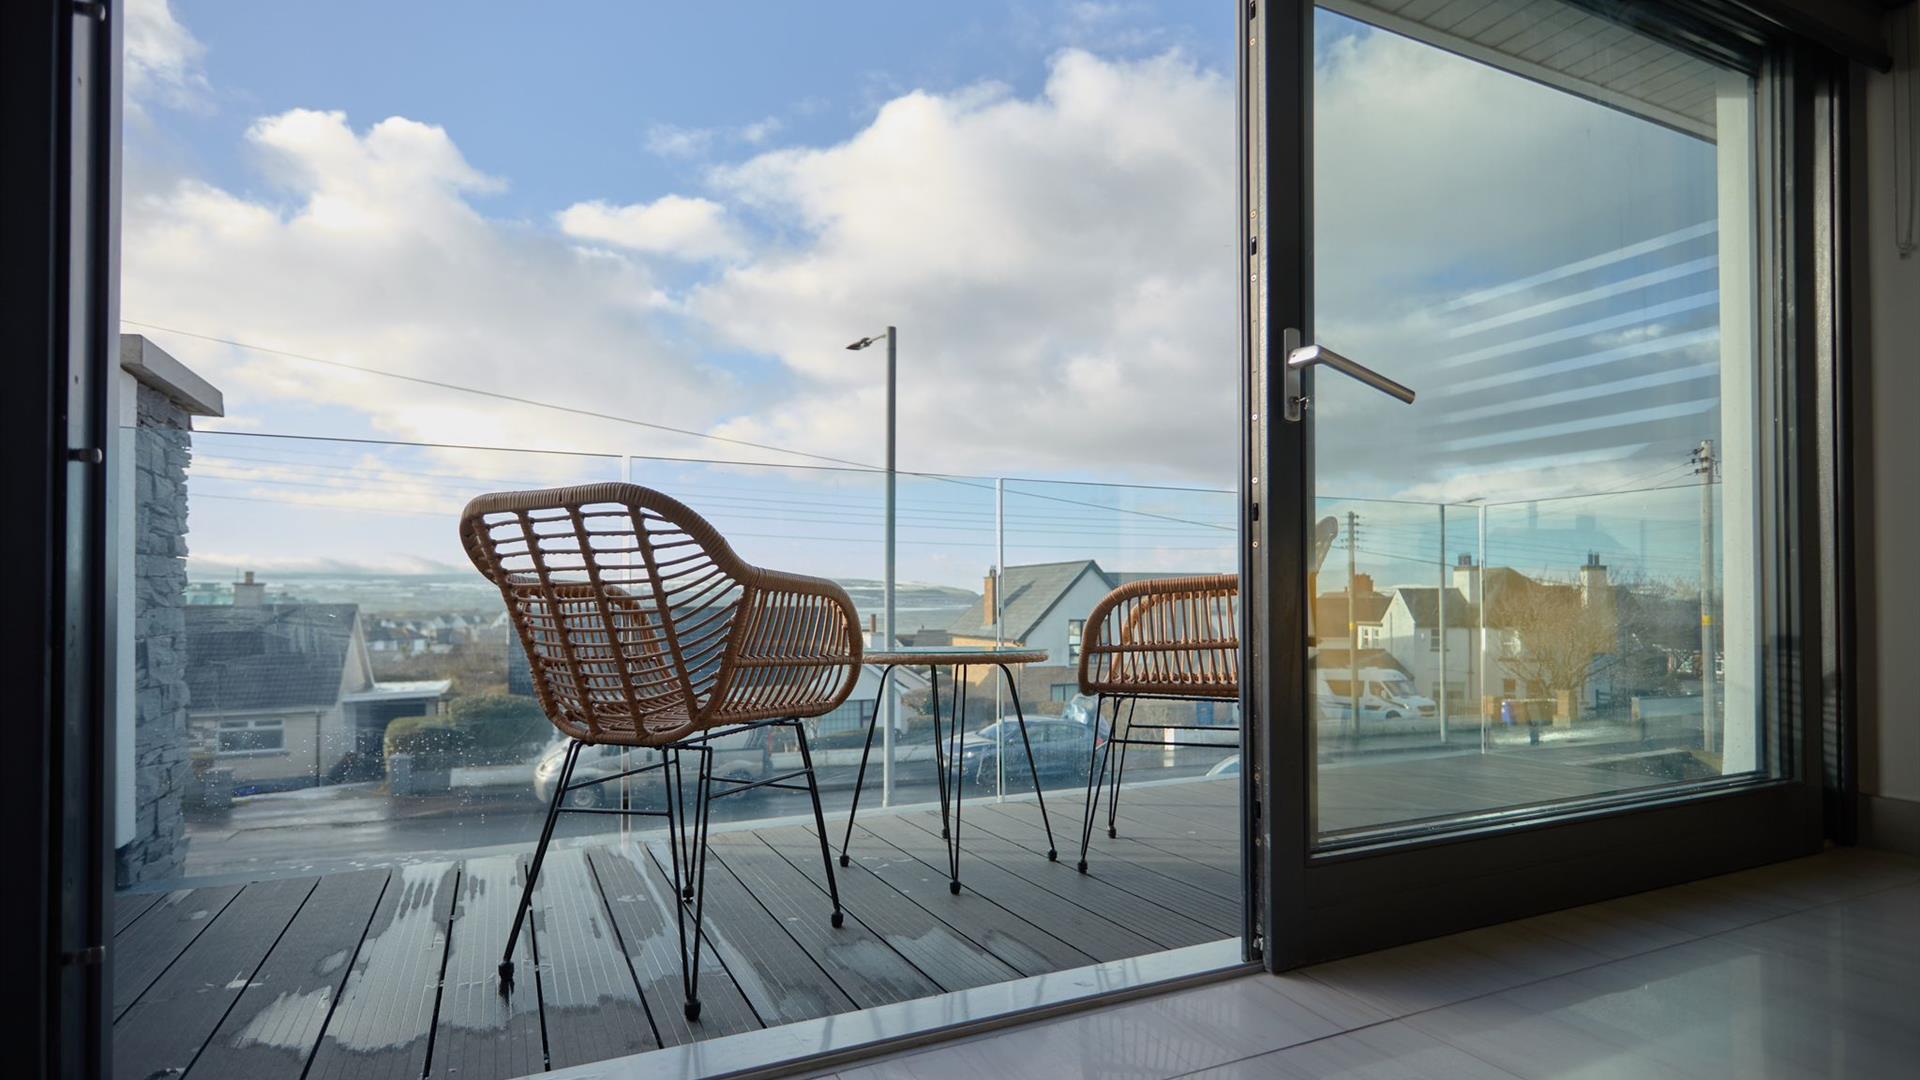 First floor balcony with views over Portstewart Beach, Castlerock and Donegal